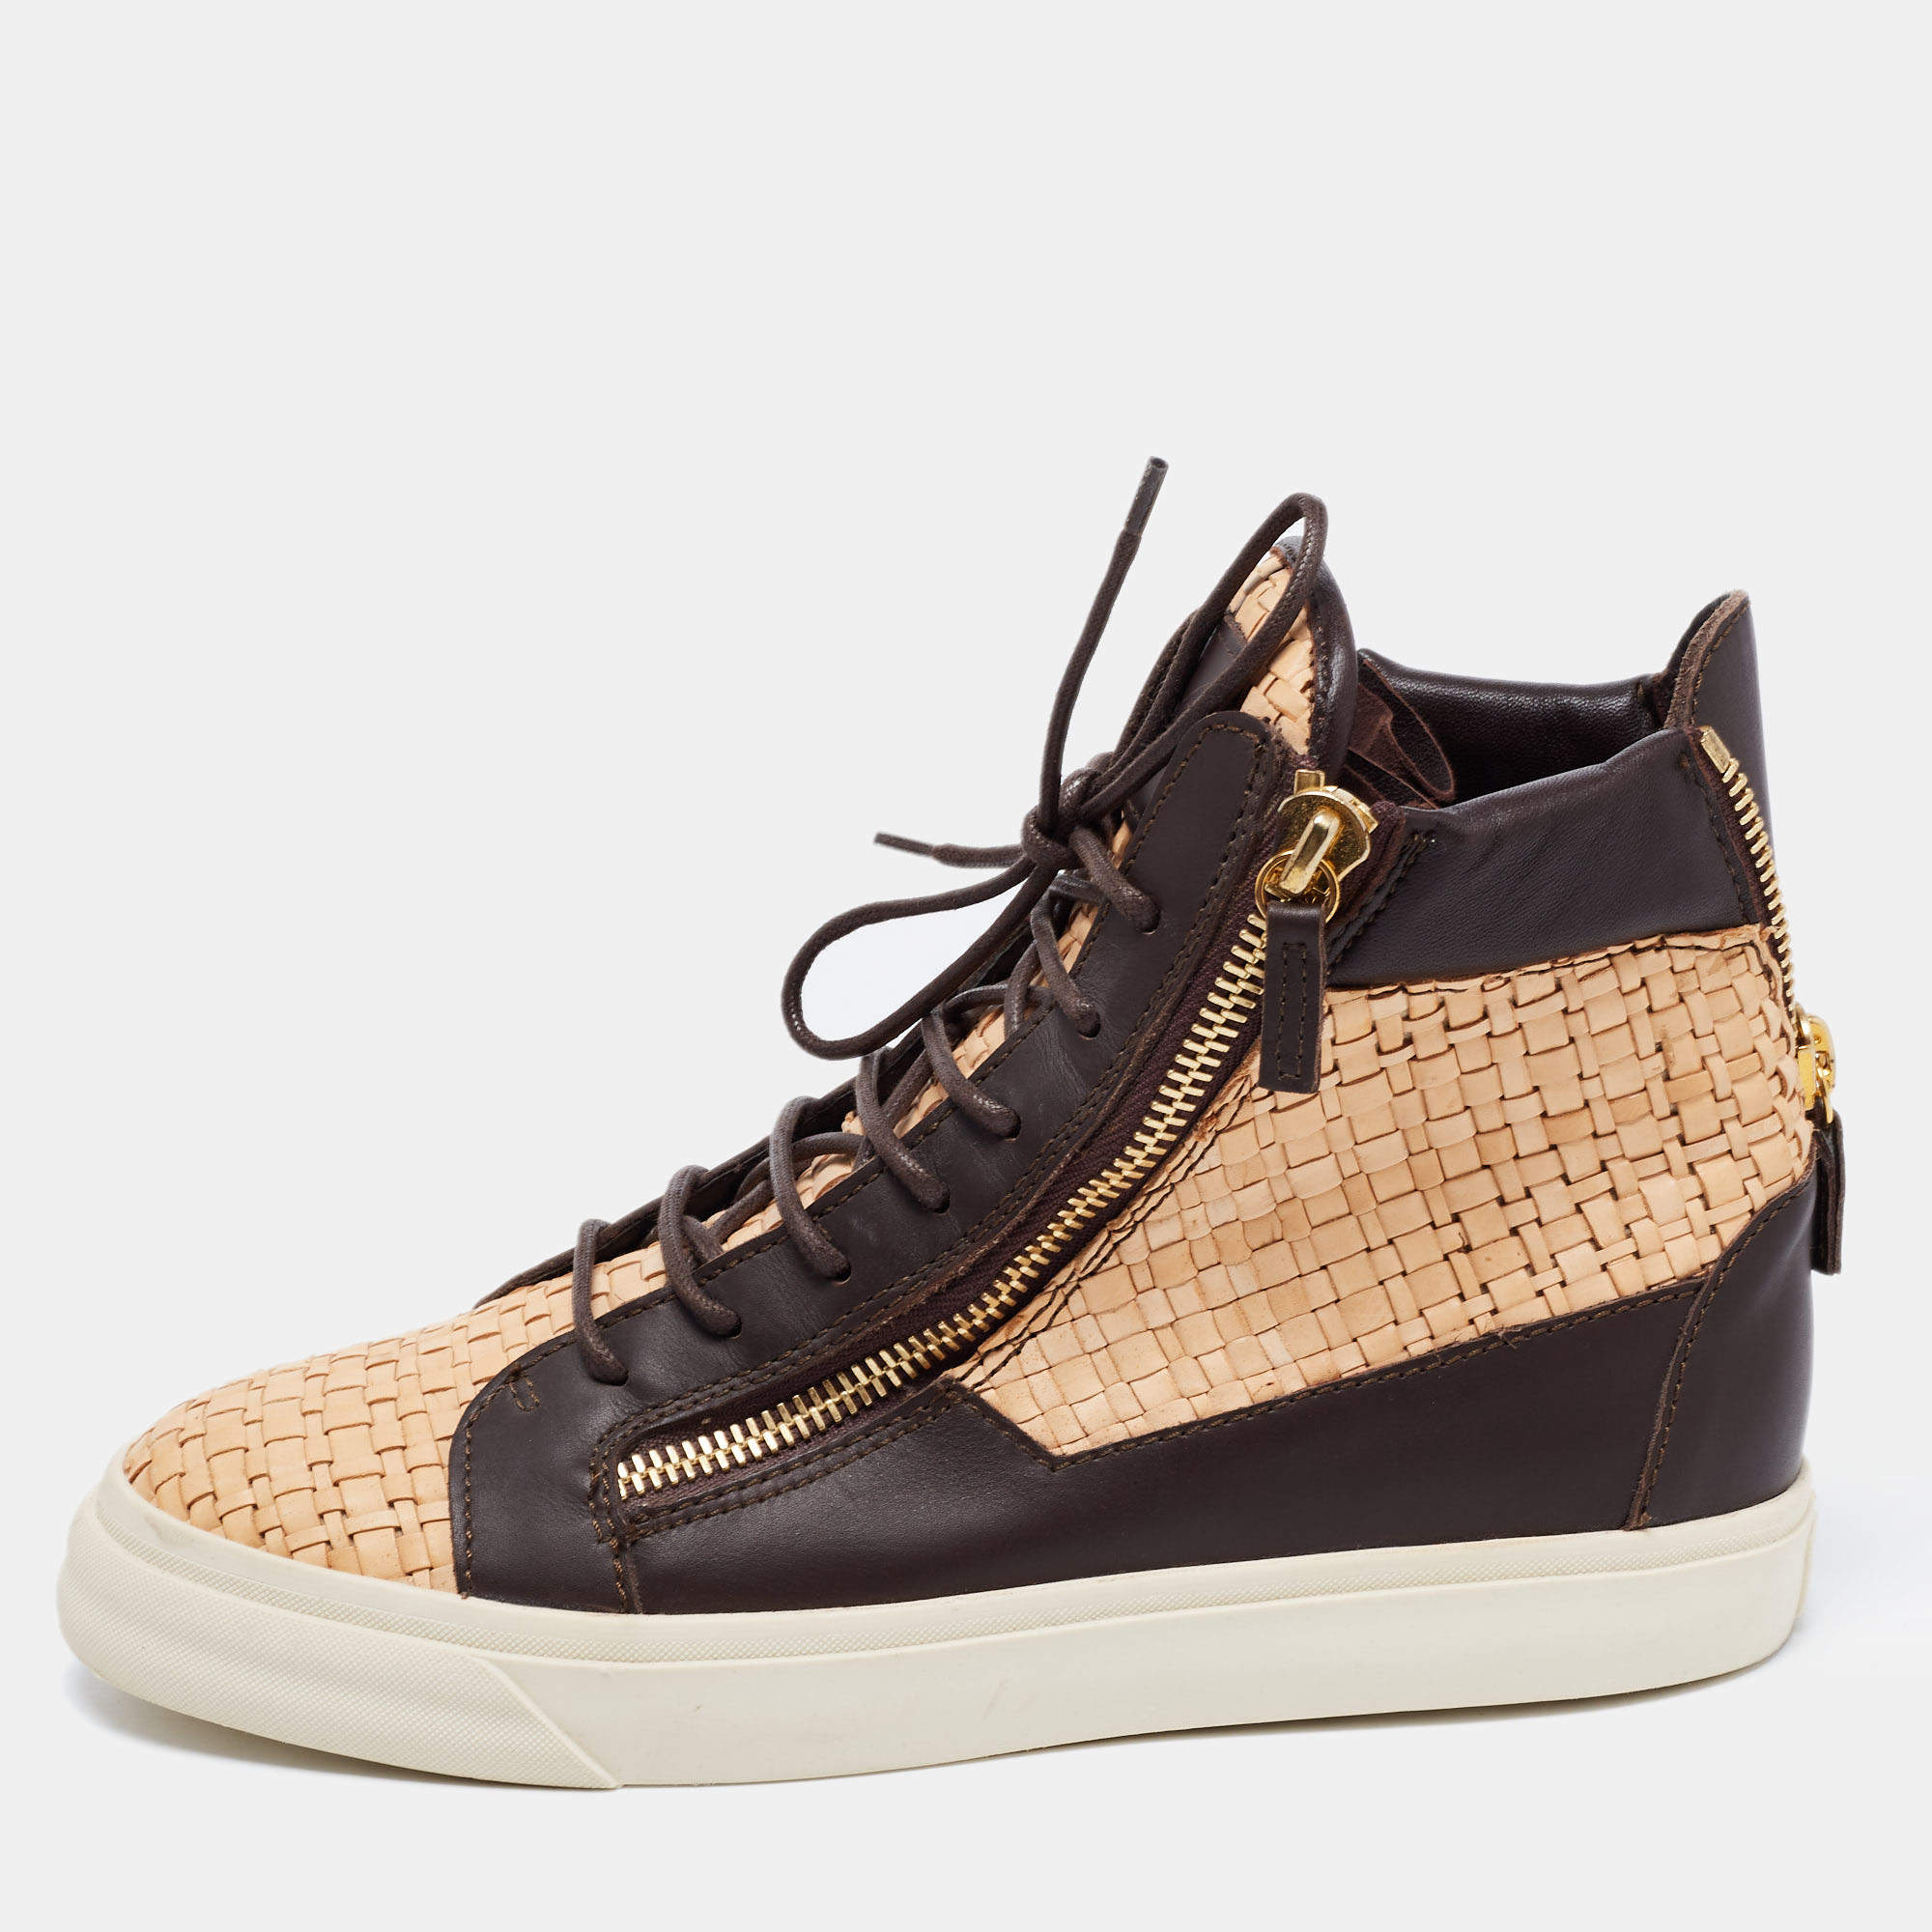 Giuseppe Zanotti Beige/Brown Woven and Leather High Top Sneakers Size 40